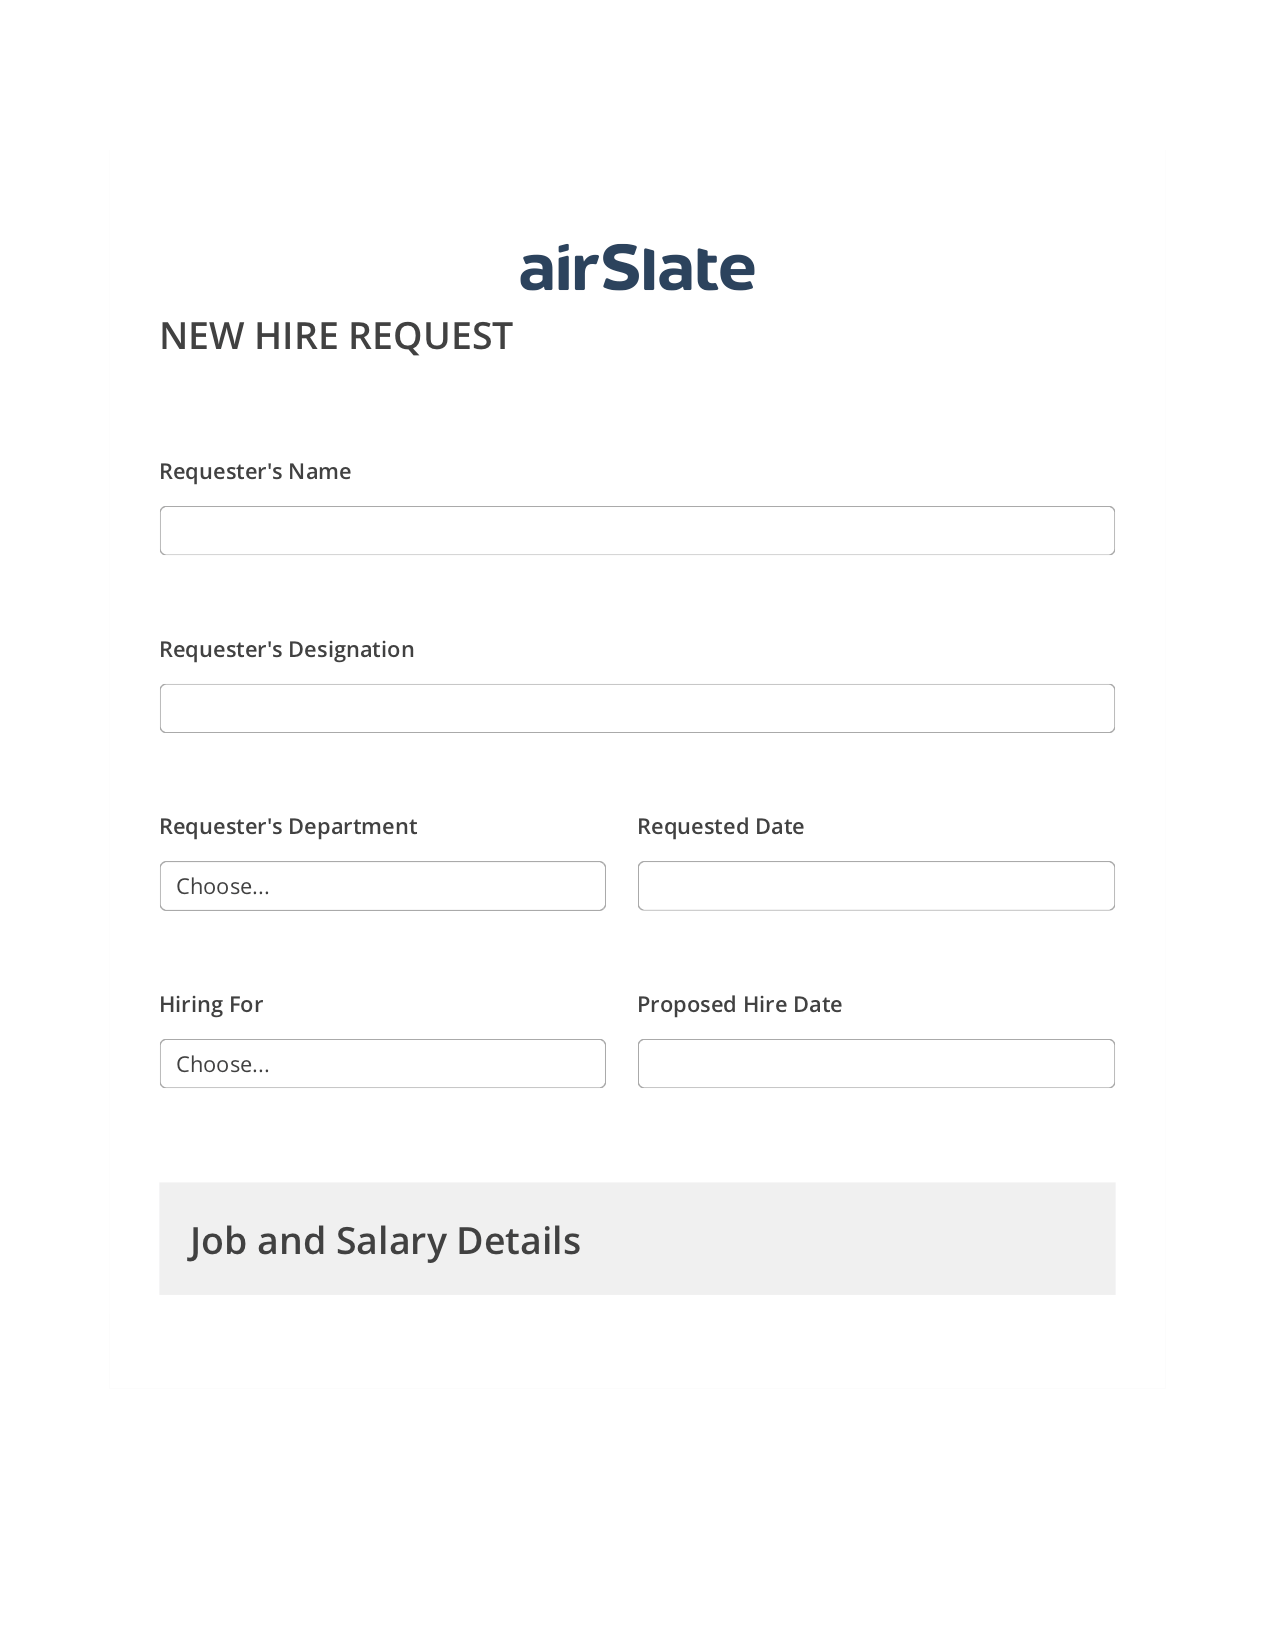 Hiring Request Workflow Pre-fill Dropdowns from Google Sheet Bot, Rename Slate Bot, Export to Excel 365 Bot